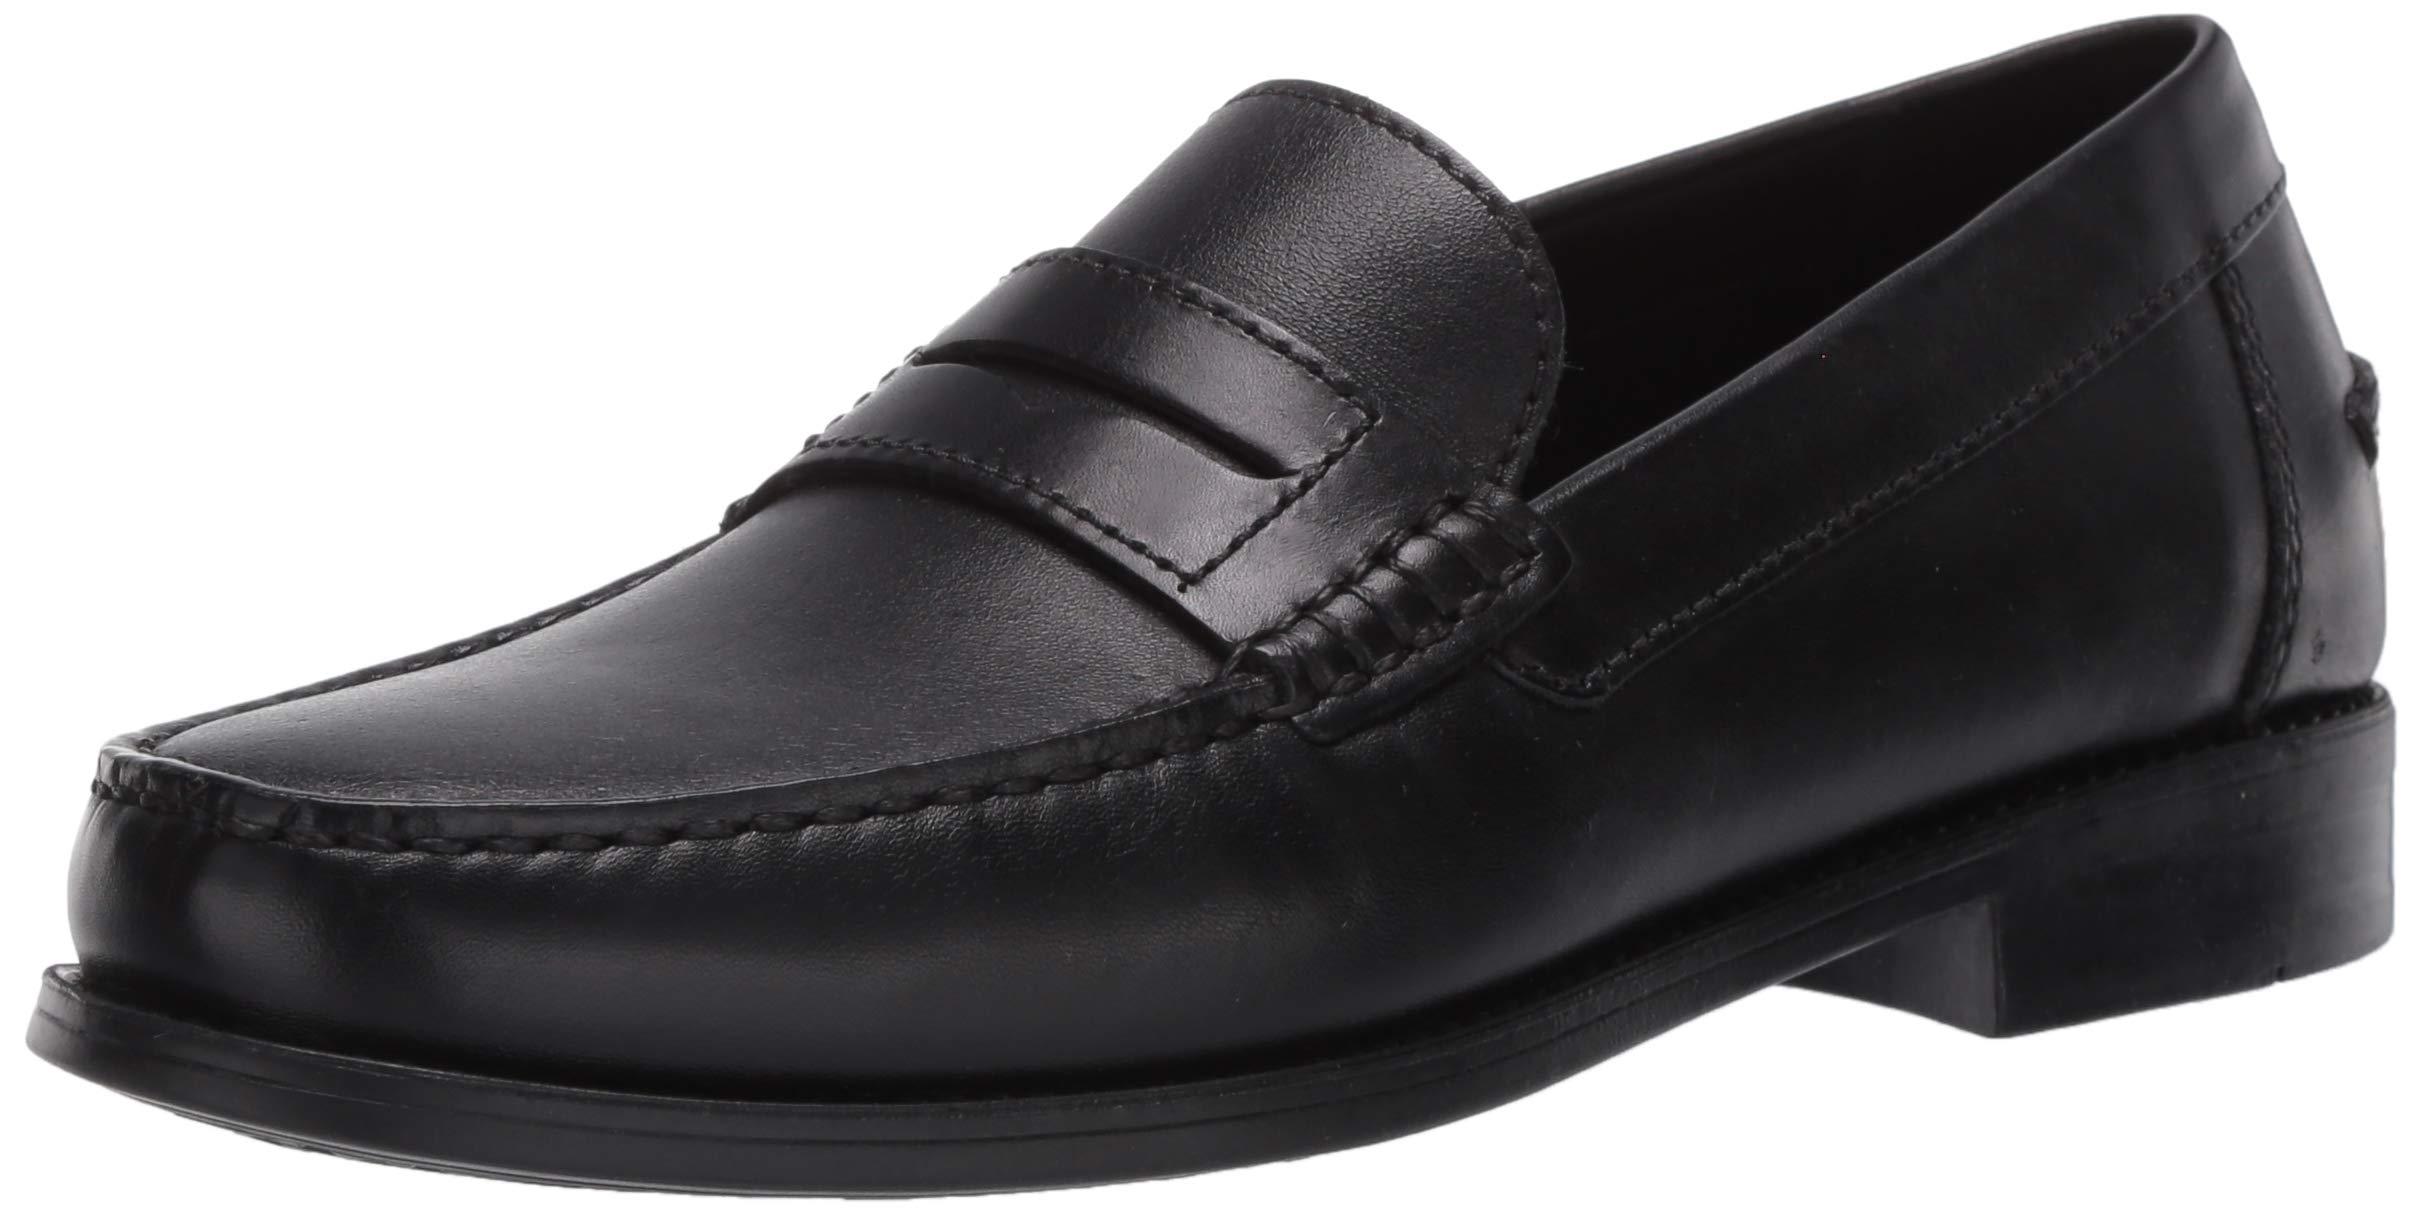 Geox Leather New Damon 1 Slip-on Loafer in Black for Men - Save 46% - Lyst